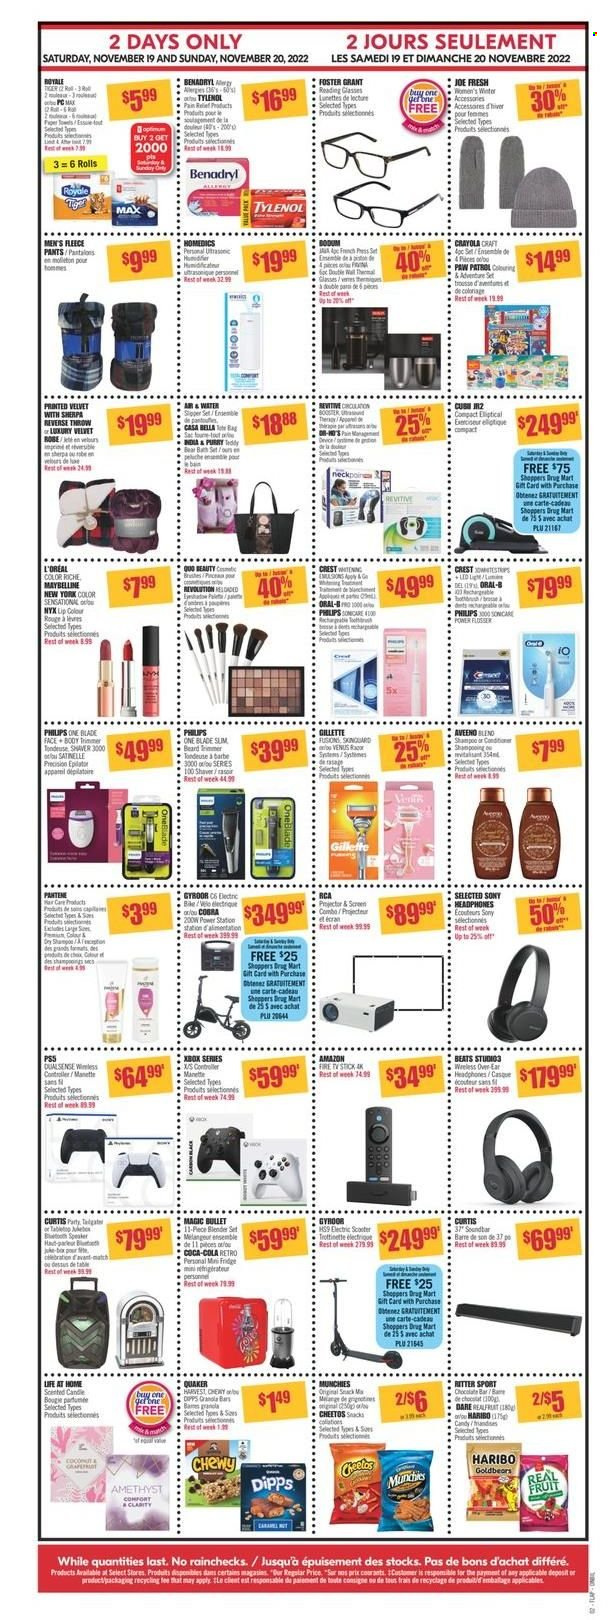 thumbnail - Shoppers Drug Mart Flyer - November 17, 2022 - November 25, 2022 - Sales products - Sony, Amazon Fire, Philips, Quaker, Paw Patrol, snack, Haribo, Ritter Sport, chocolate bar, Cheetos, granola bar, Coca-Cola, pants, Aveeno, Bella, Crest, Gillette, L’Oréal, NYX Cosmetics, Venus, shaver, trimmer, eyeshadow, Maybelline, candle, Optimum, RCA, speaker, sound bar, Beats, headphones, Fire TV Stick, TV stick, Sonicare, epilator, Satinelle, Revitive, train, pain relief, Tylenol, shampoo, Pantene, Oral-B, Xbox. Page 2.